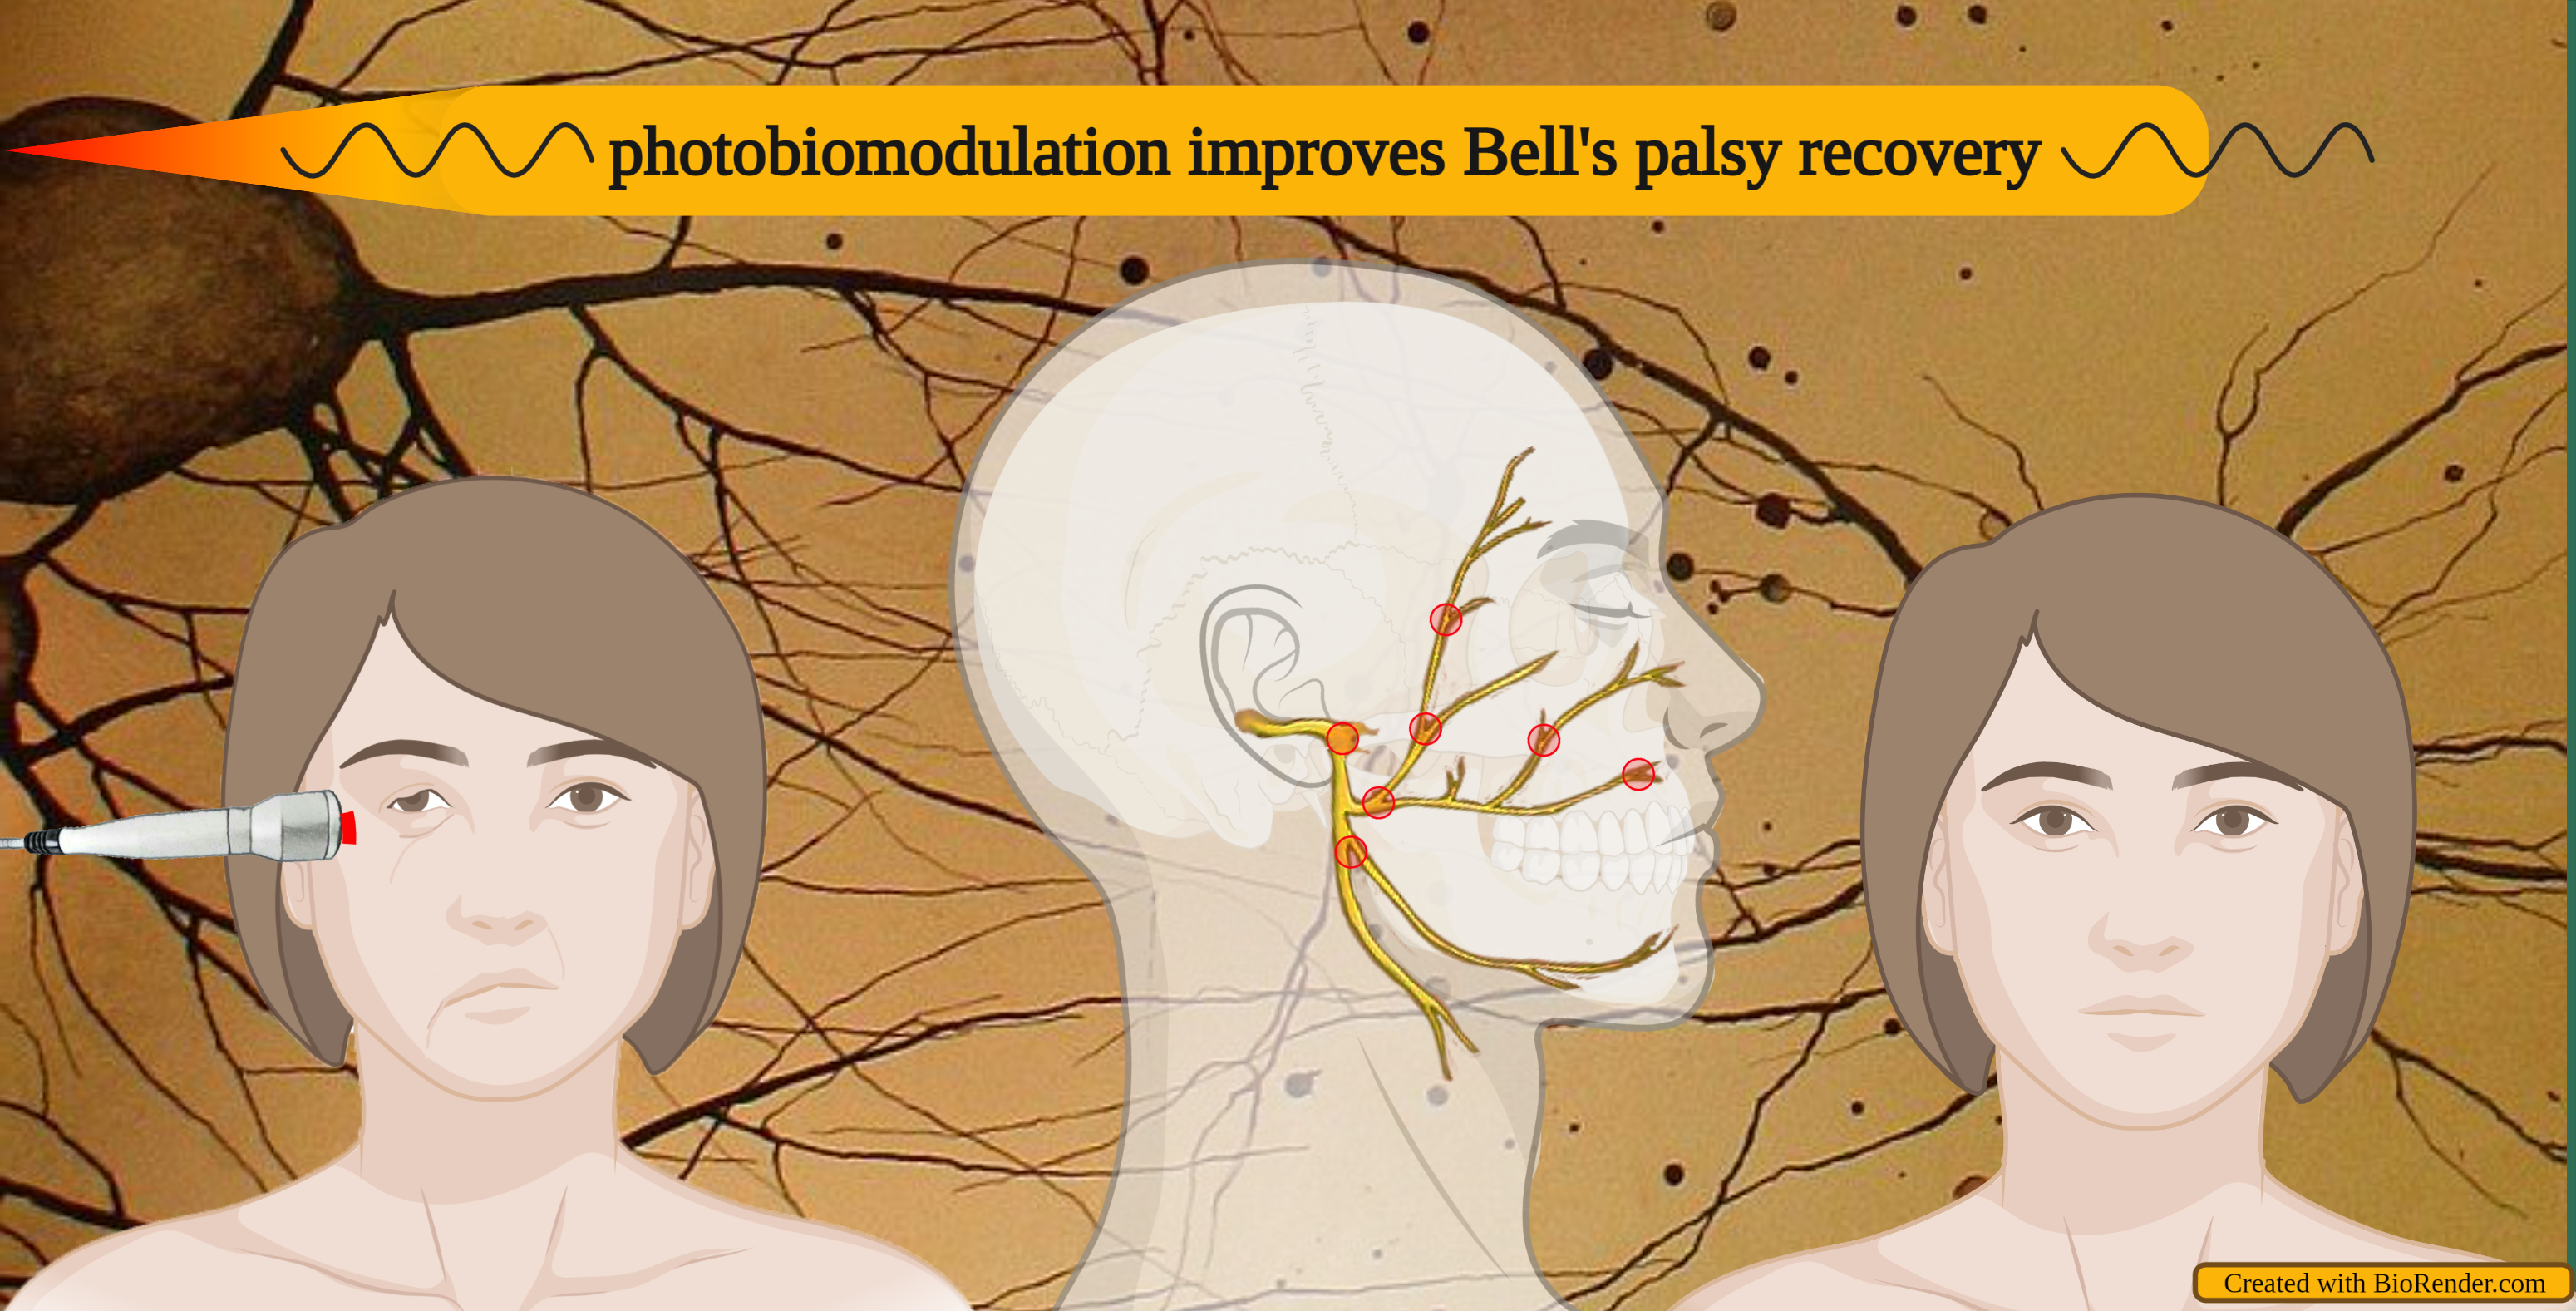 Electrical muscle stimulation for bell's palsy 